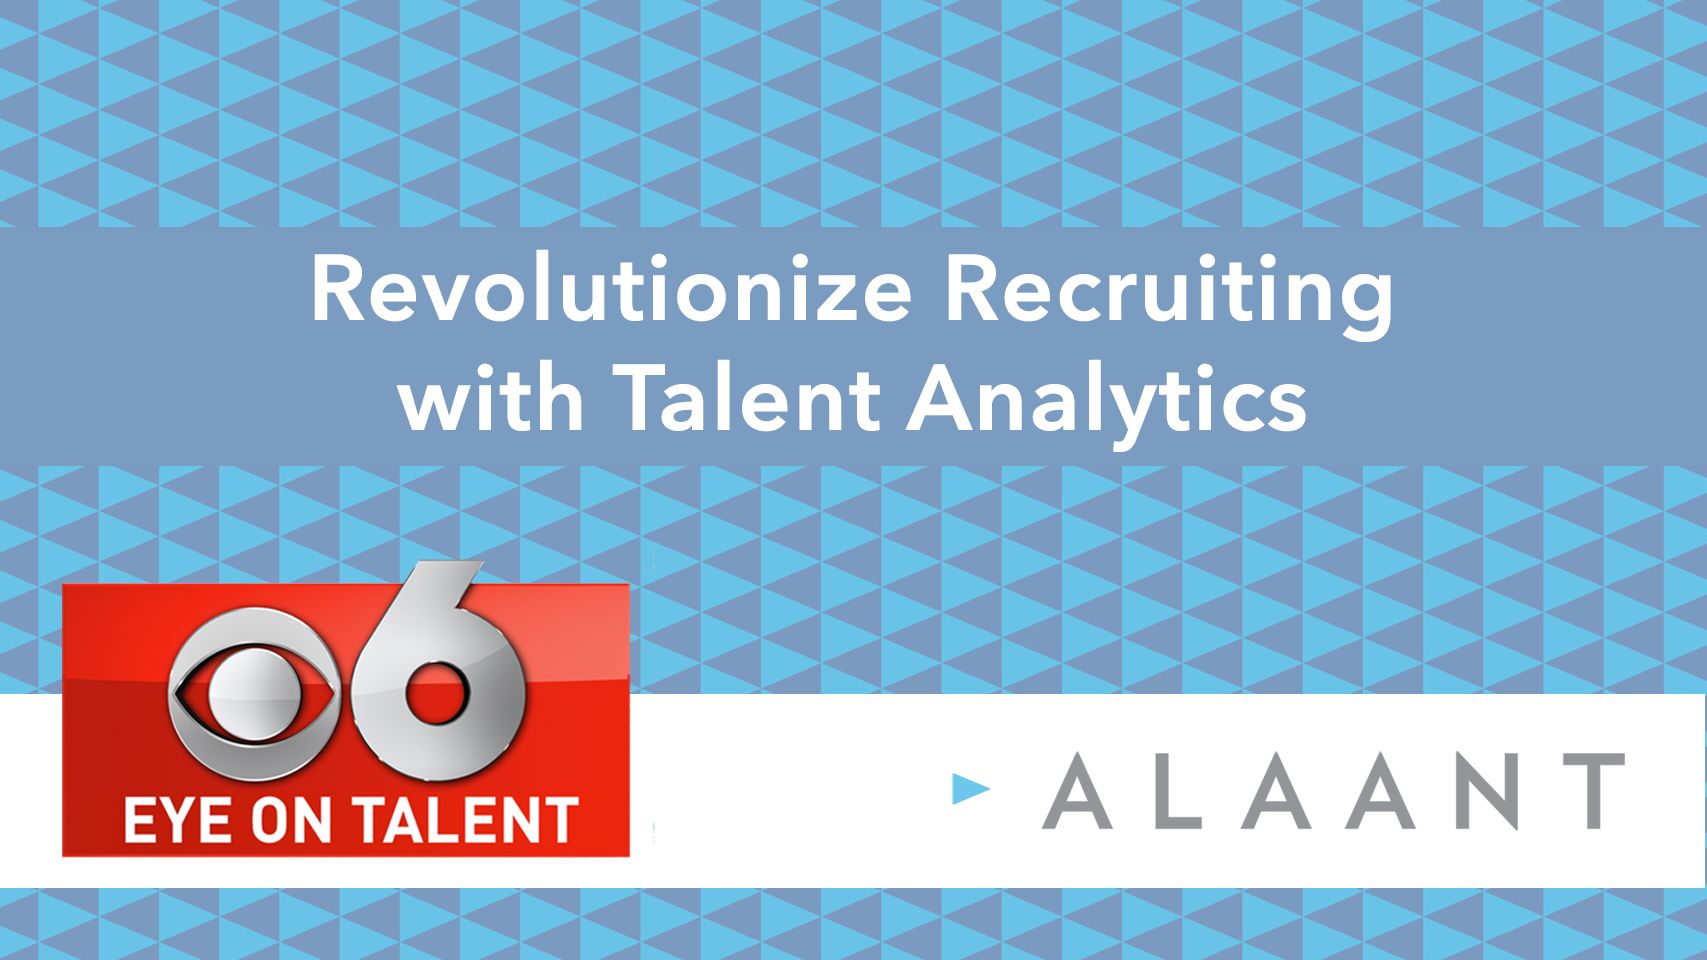 Alaant Eye on Talent Revolutionize Recruiting with Talent Analytics